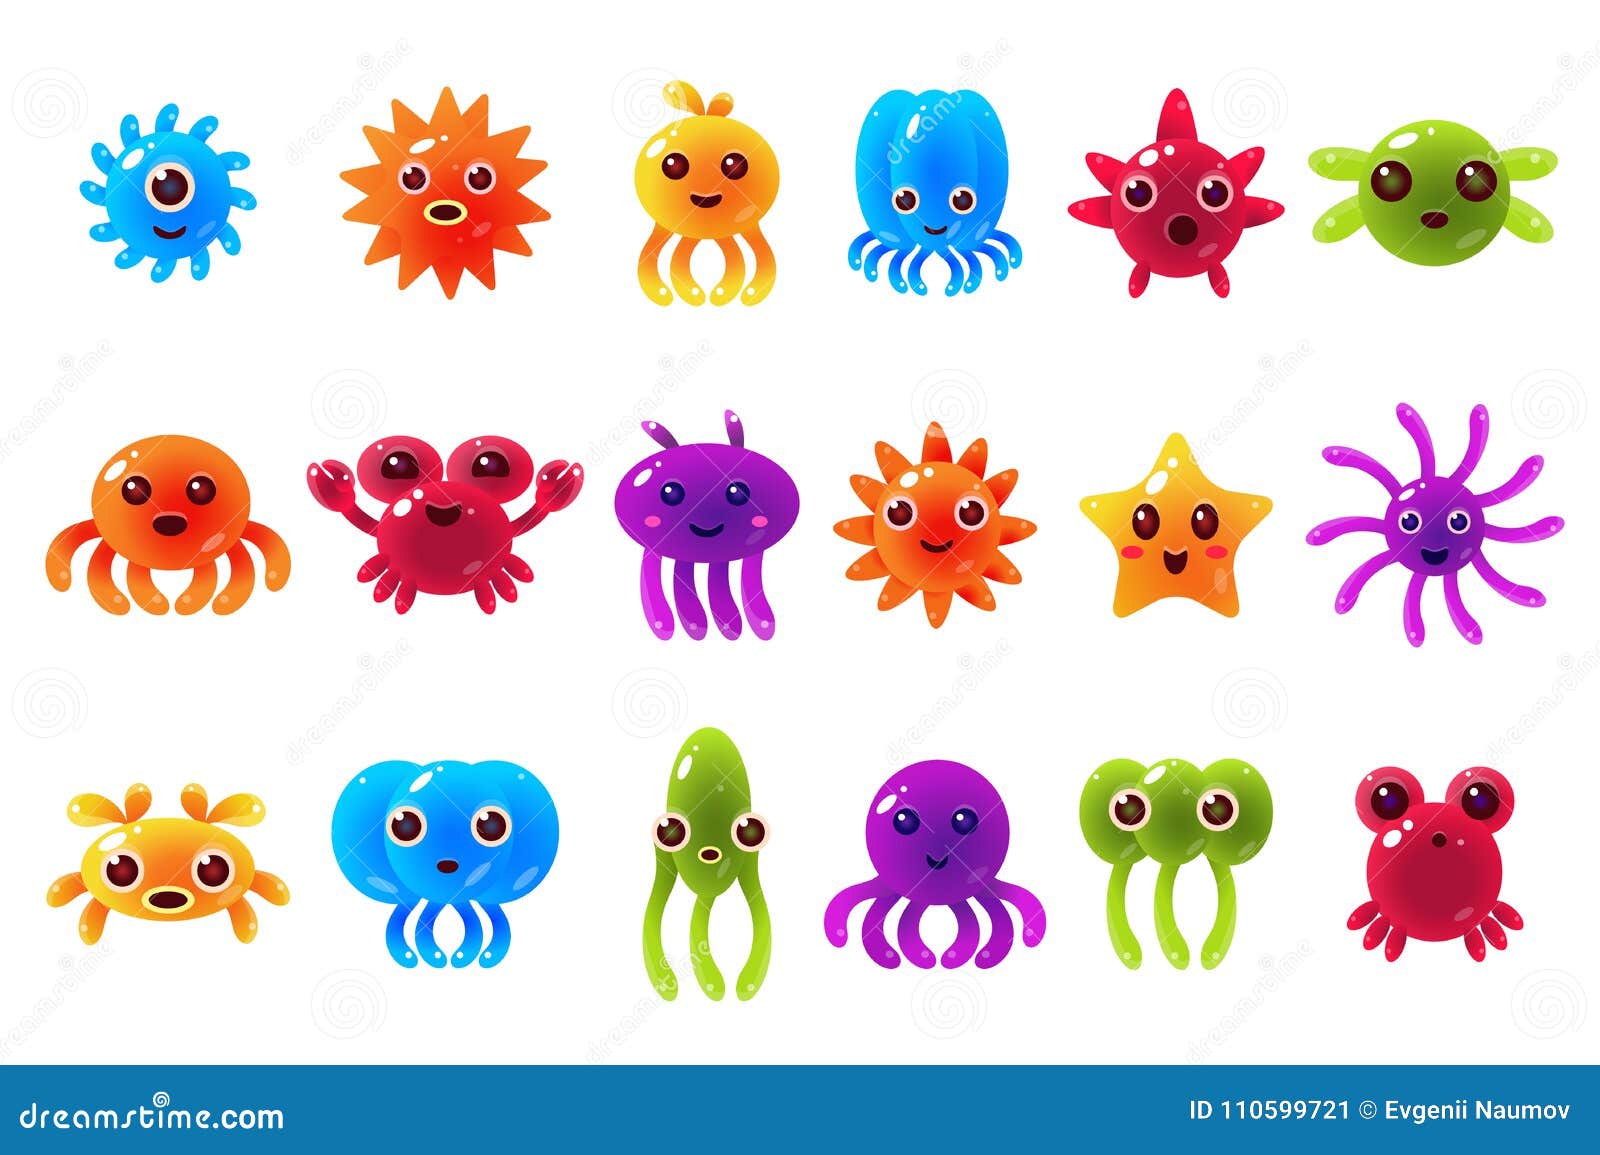 cute cute seta creatures sett with different emotions, colorful glossy underwater animals characters with funny faces